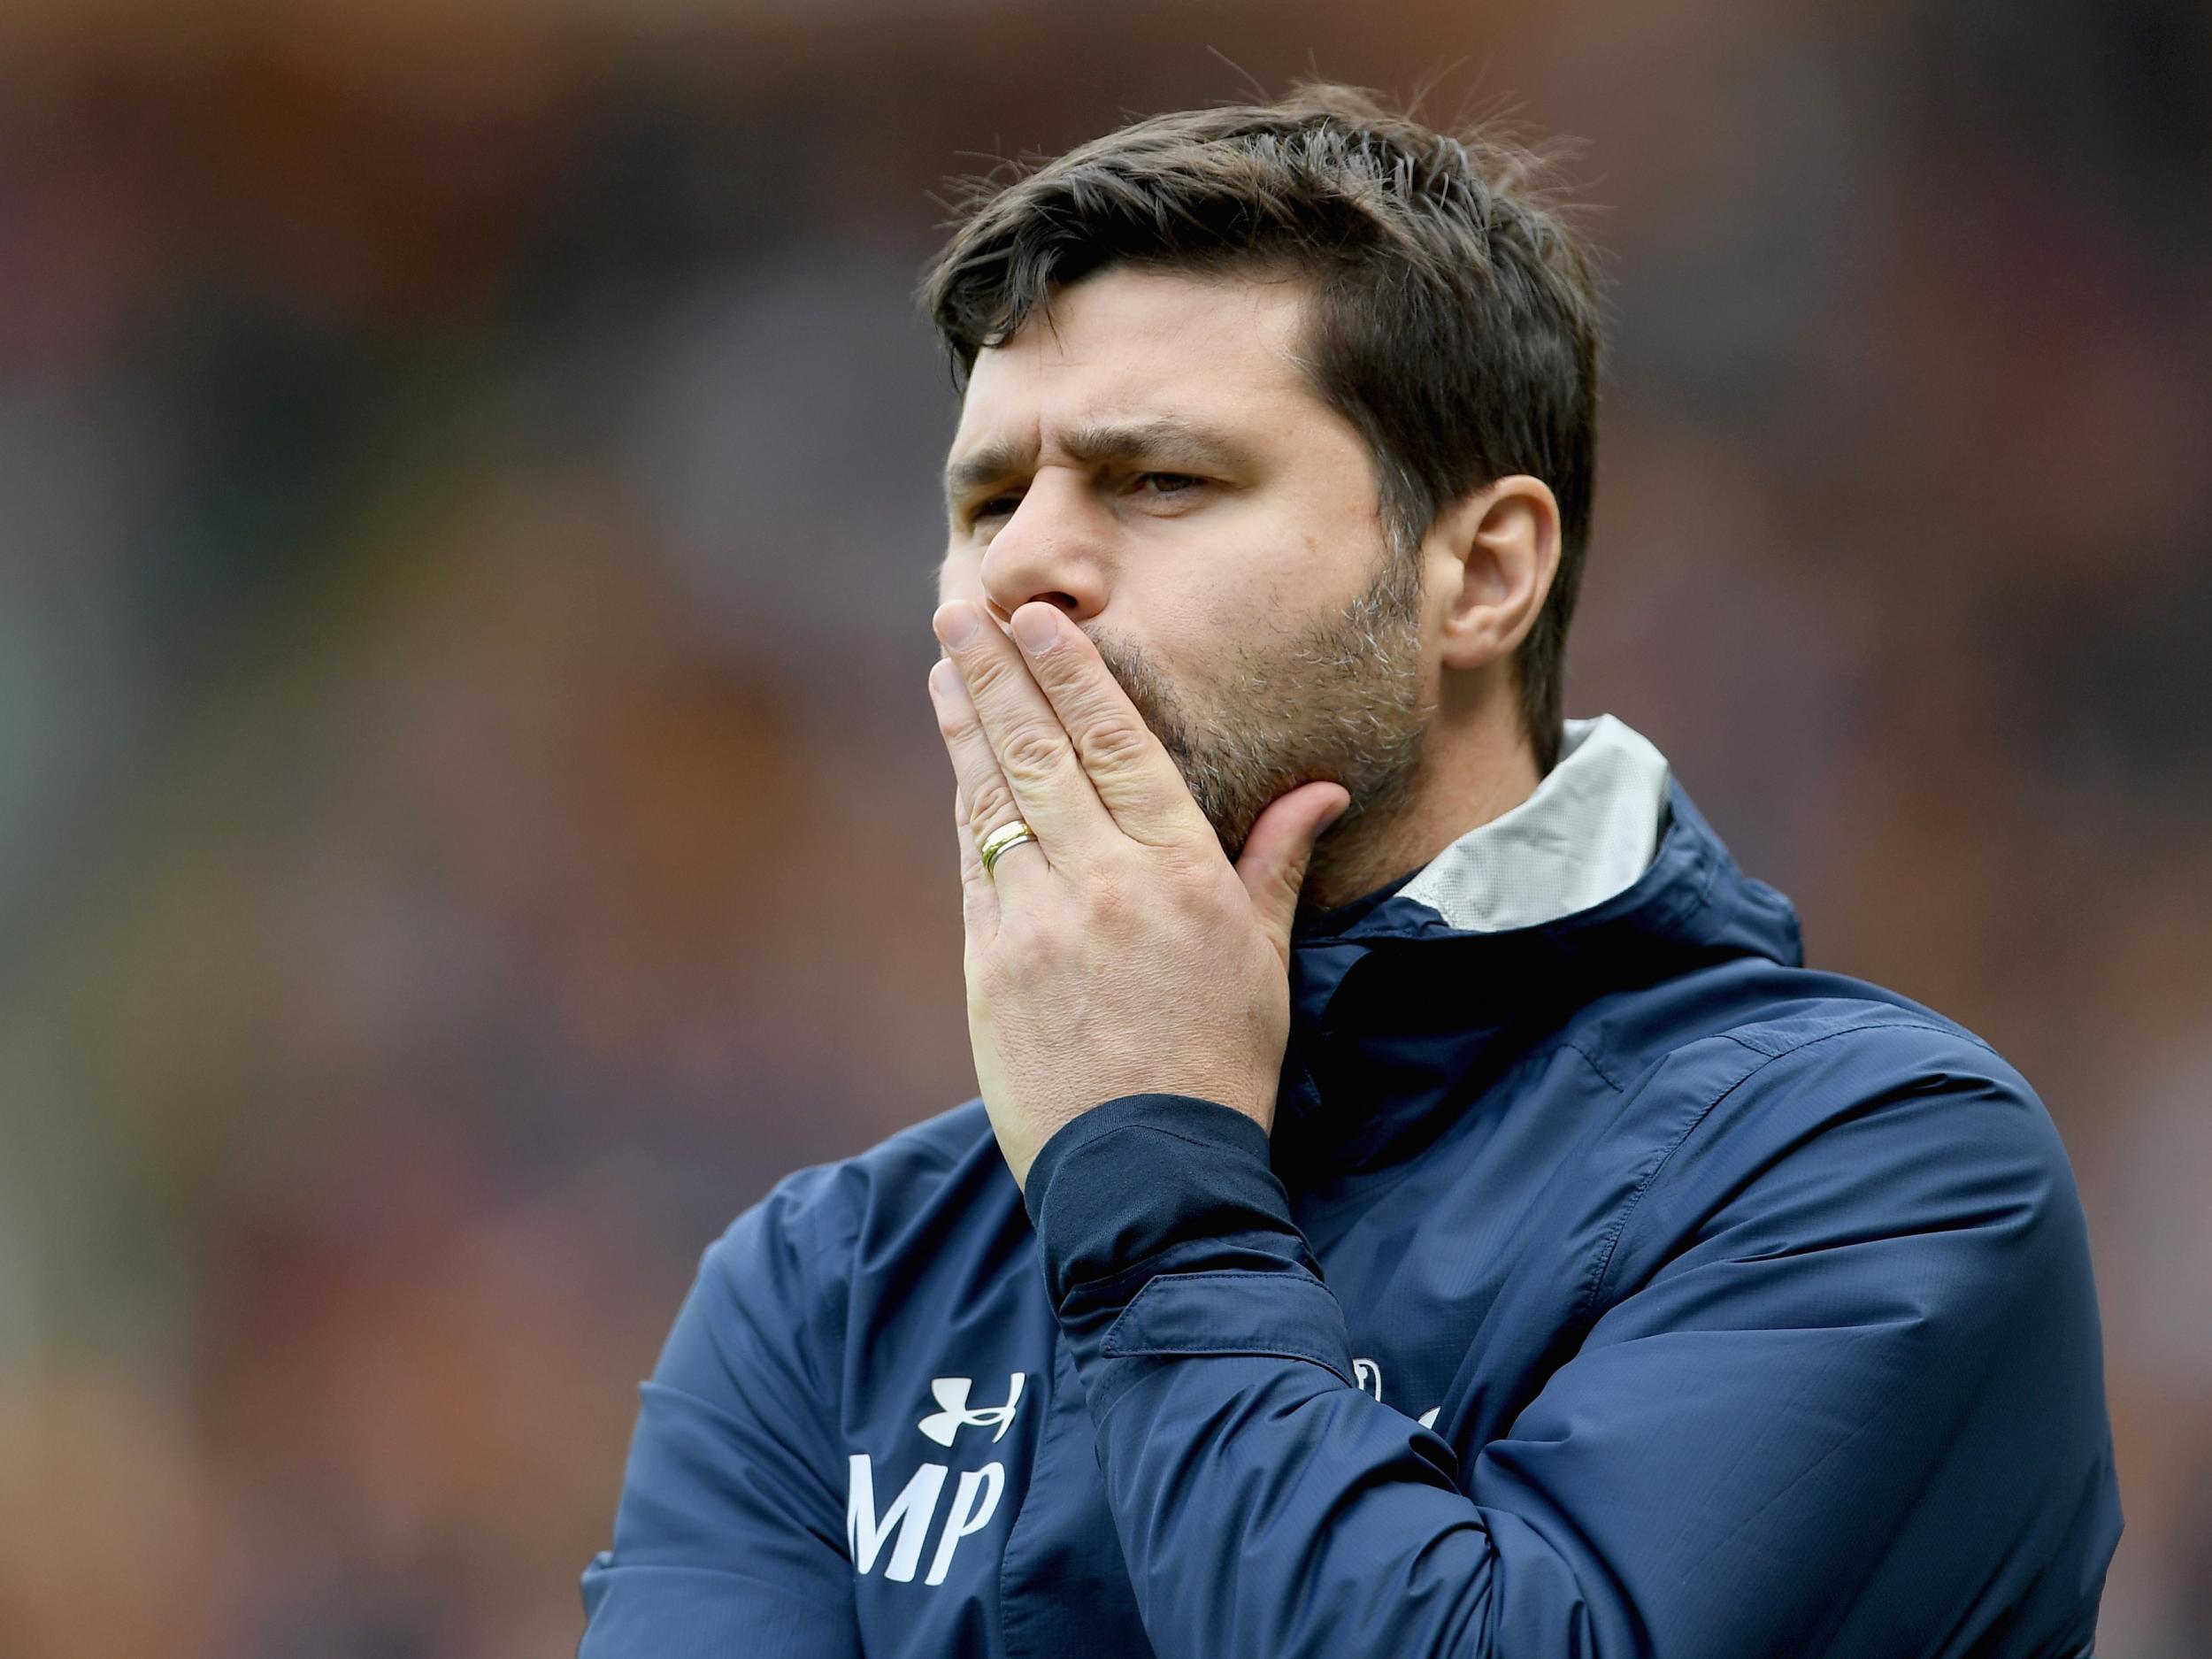 Pochettino said 'we are working hard' to add to the squad after a friendly defeat to Man City